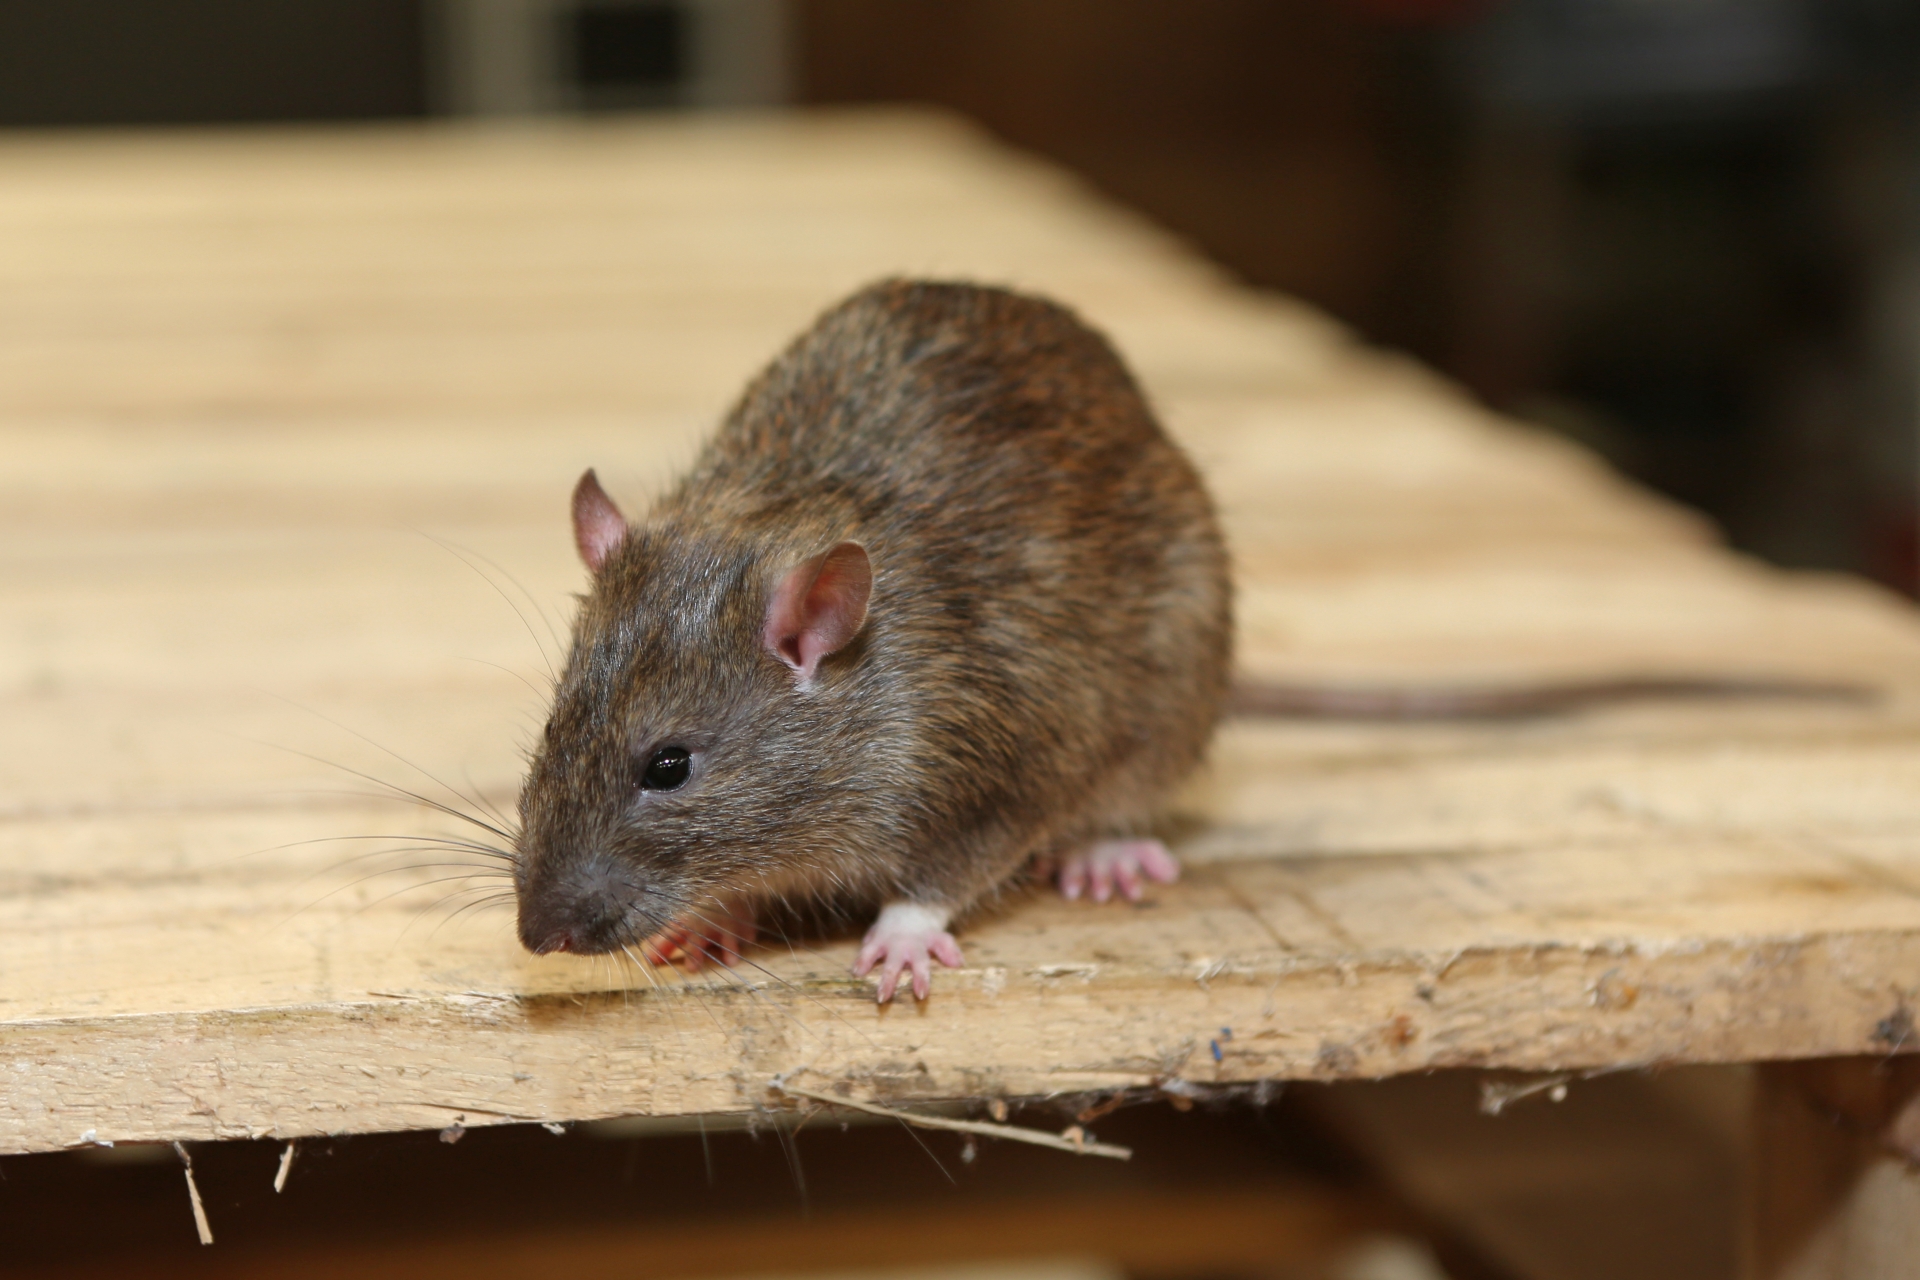 Rat Infestation, Pest Control in Mortlake, SW14. Call Now 020 8166 9746